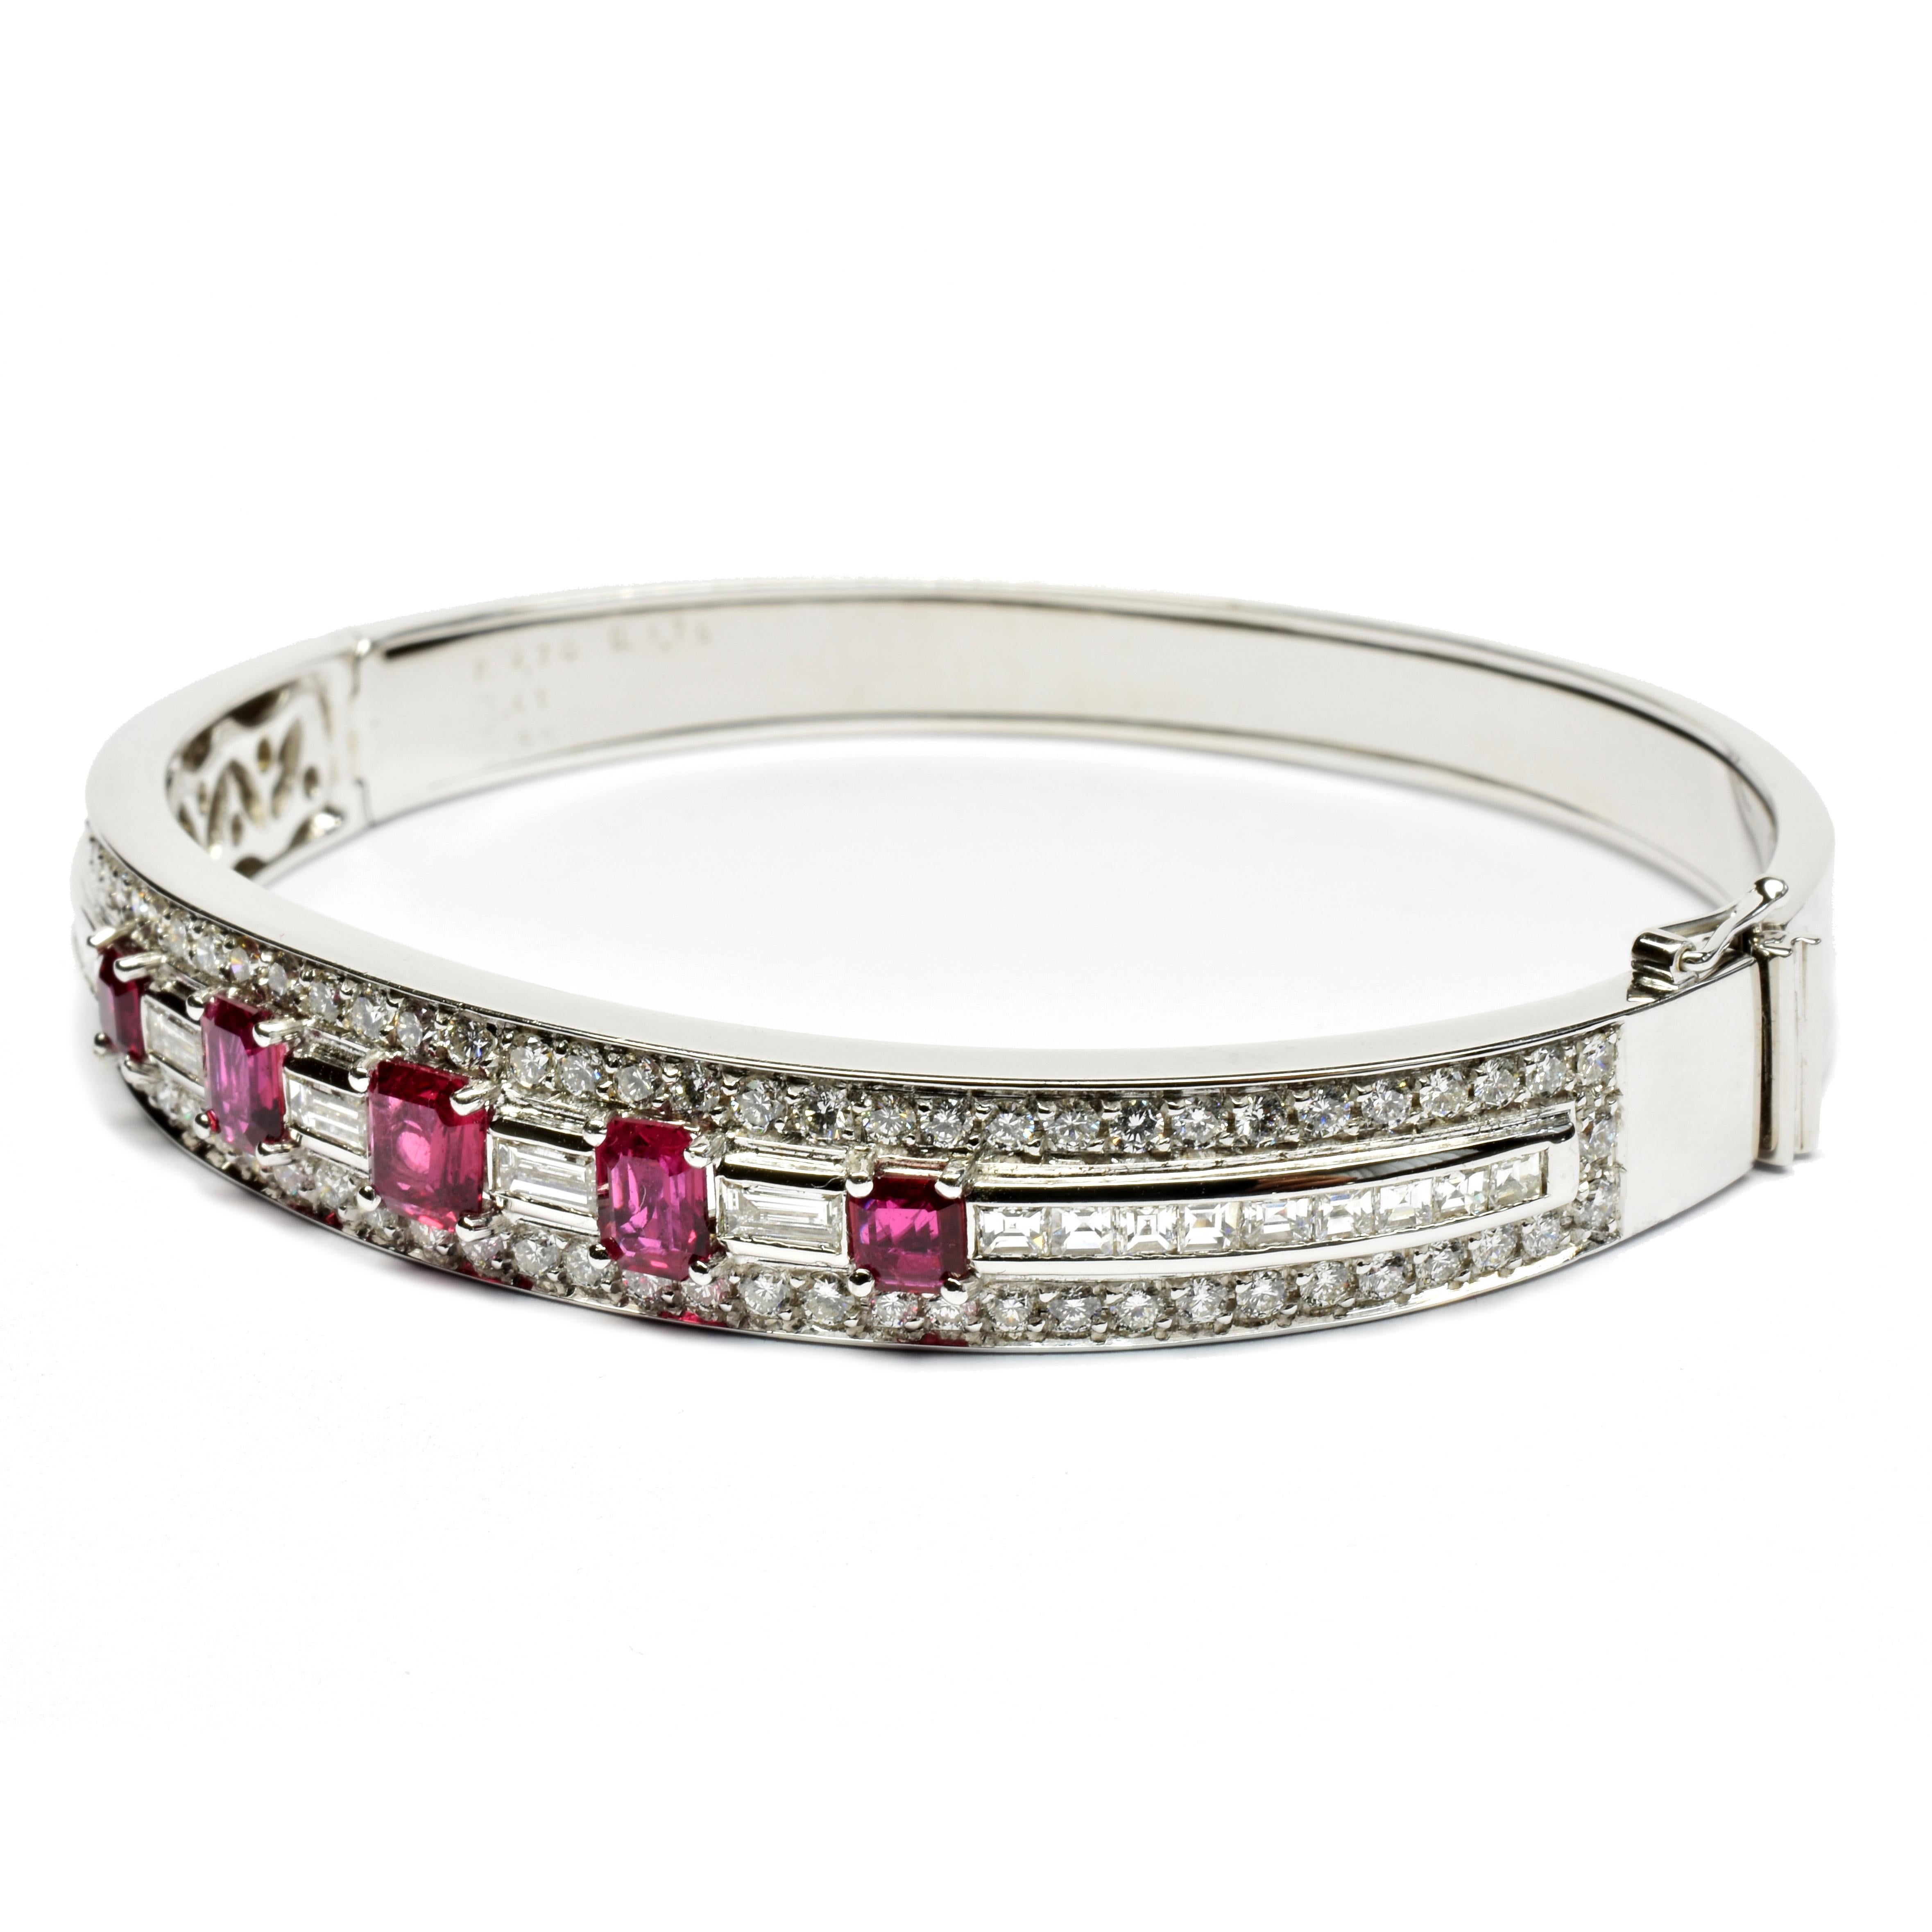 18 Kt White Gold Unique Bangle Bracelet with Octagonal Rubies,  Baguette and Round Diamonds.
One of a Kind Piece, Handmade in our Atelier in Valenza Italy.
Very Clean and Bright Rubies. 
Top quality craftmanship with a very clean and exquisite